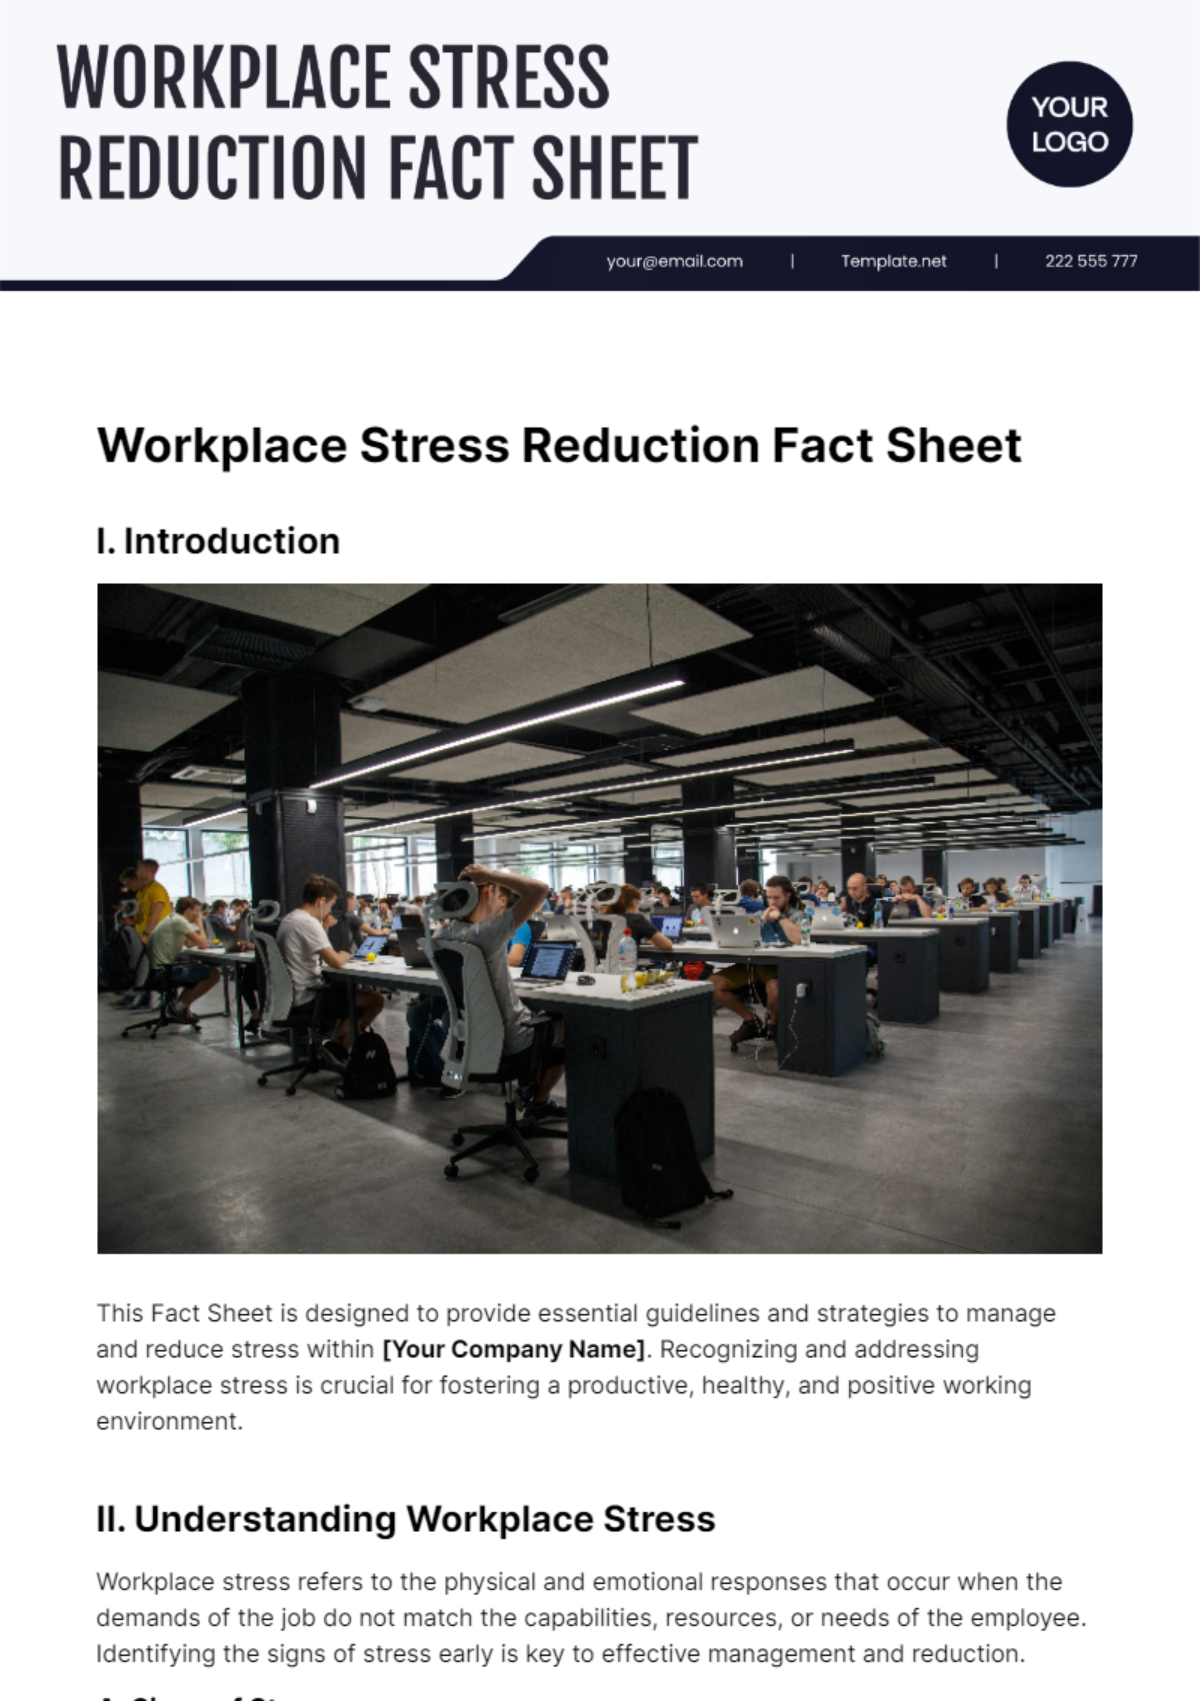 Workplace Stress Reduction Fact Sheet Template